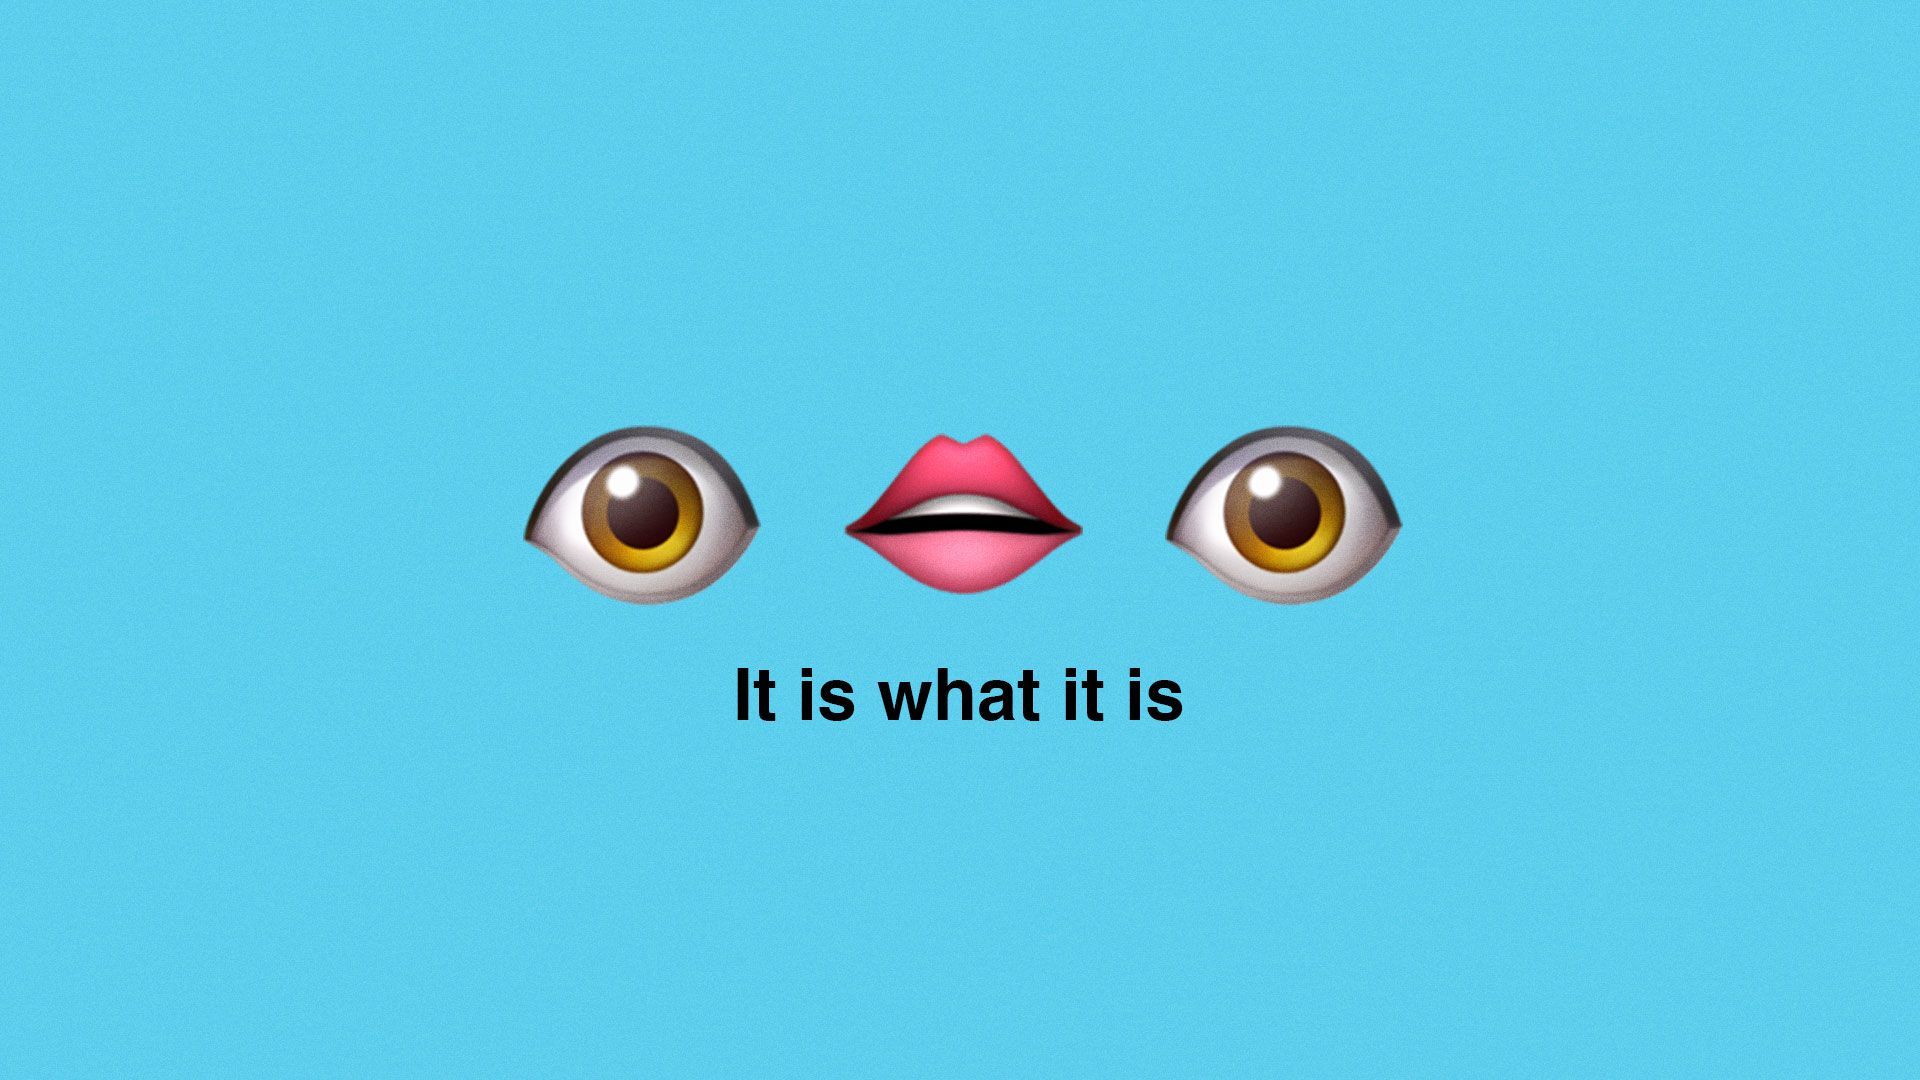 Illustration of eye, lip, and eye emoji with “It is what it is” text